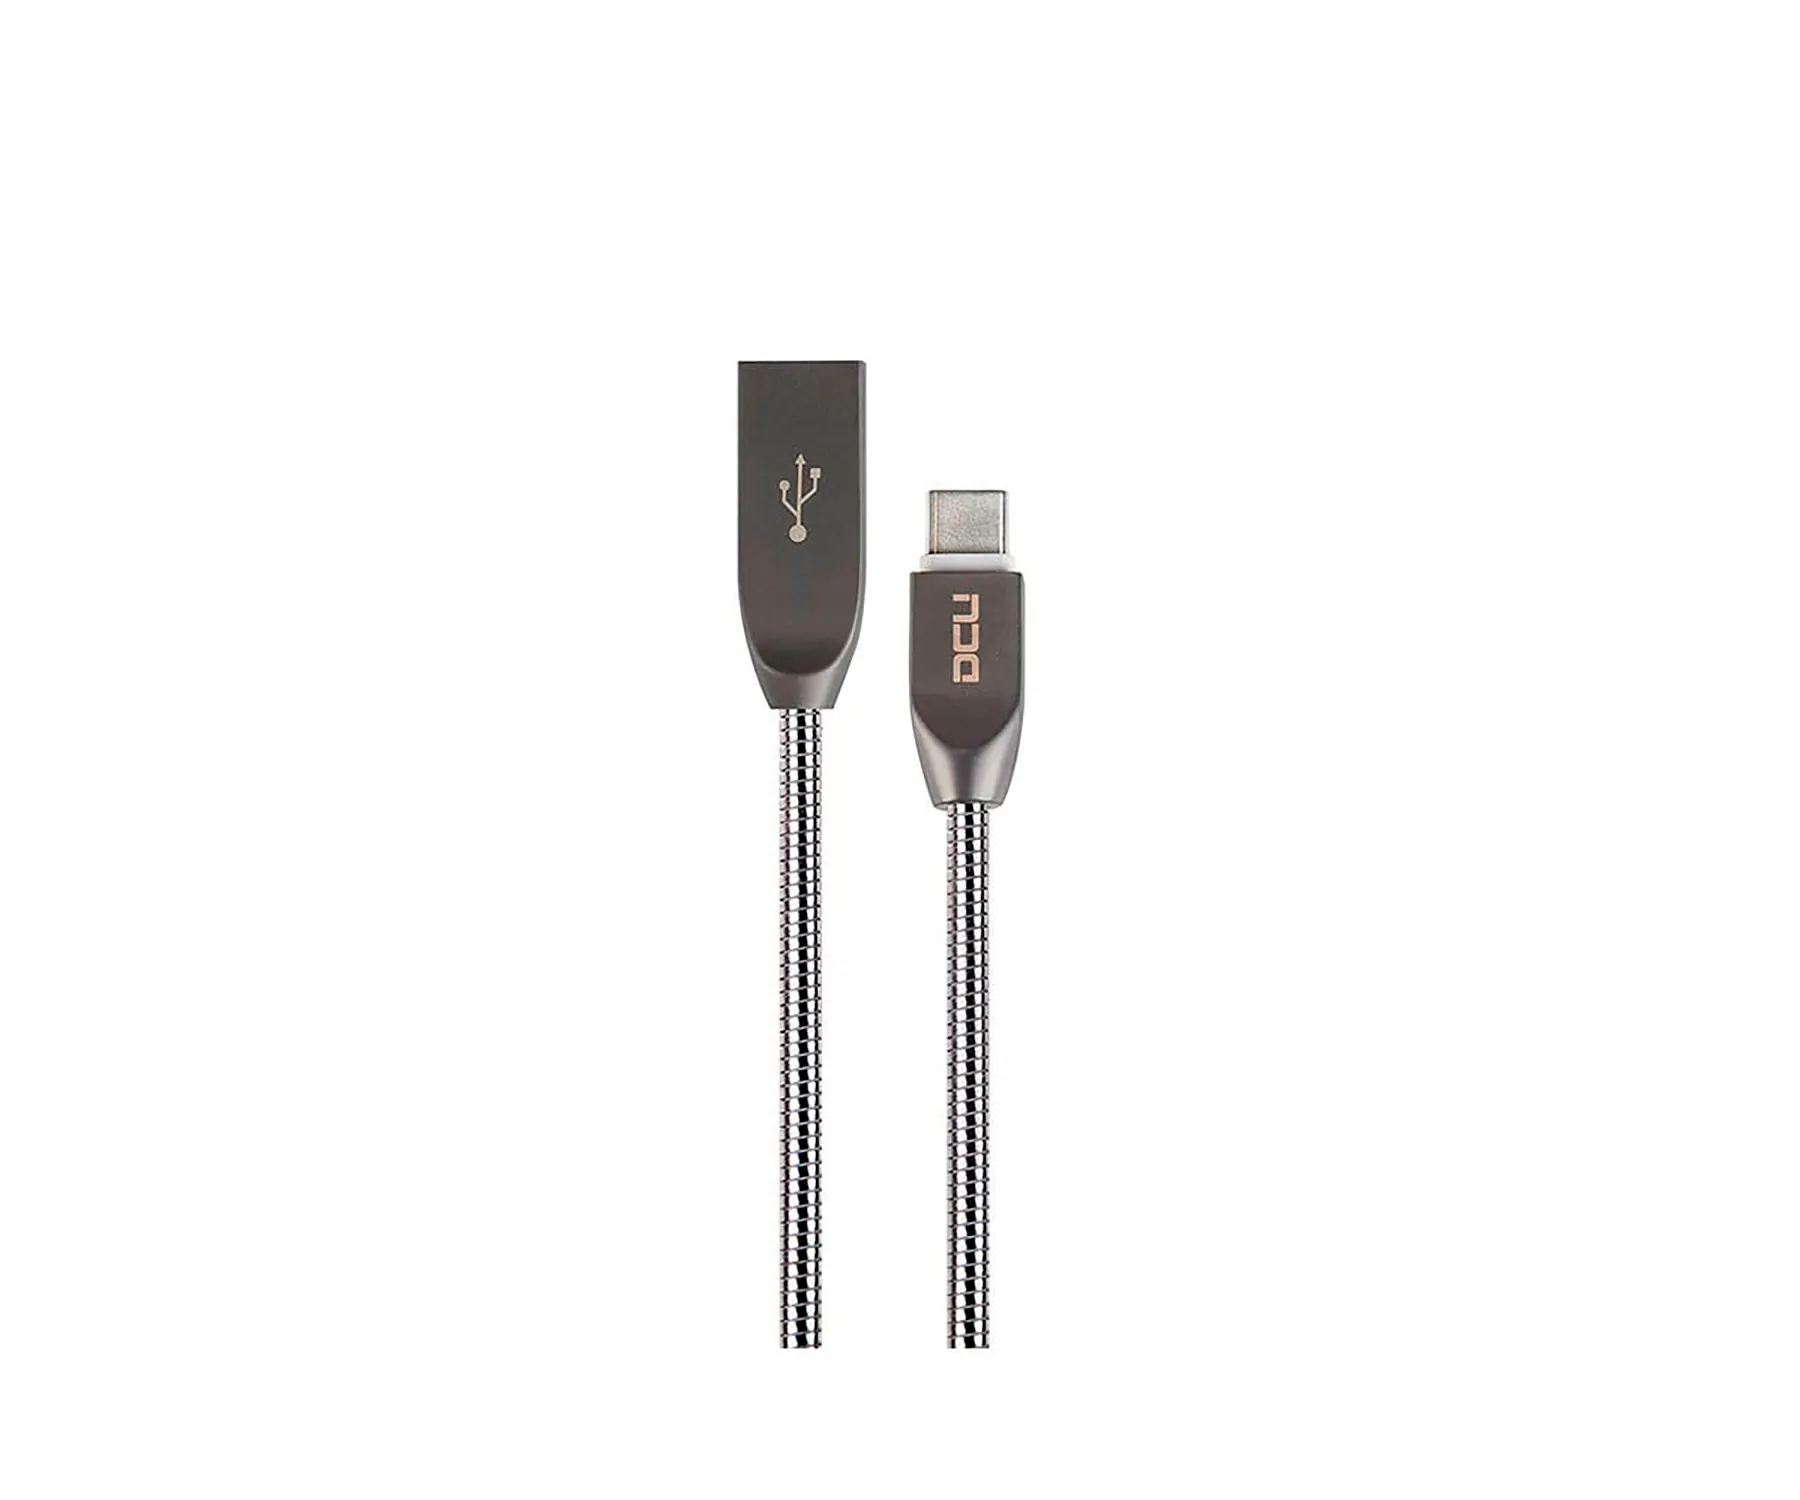 DCU CABLE USB TIPO C 3.1 A USB 2.0 1 METRO